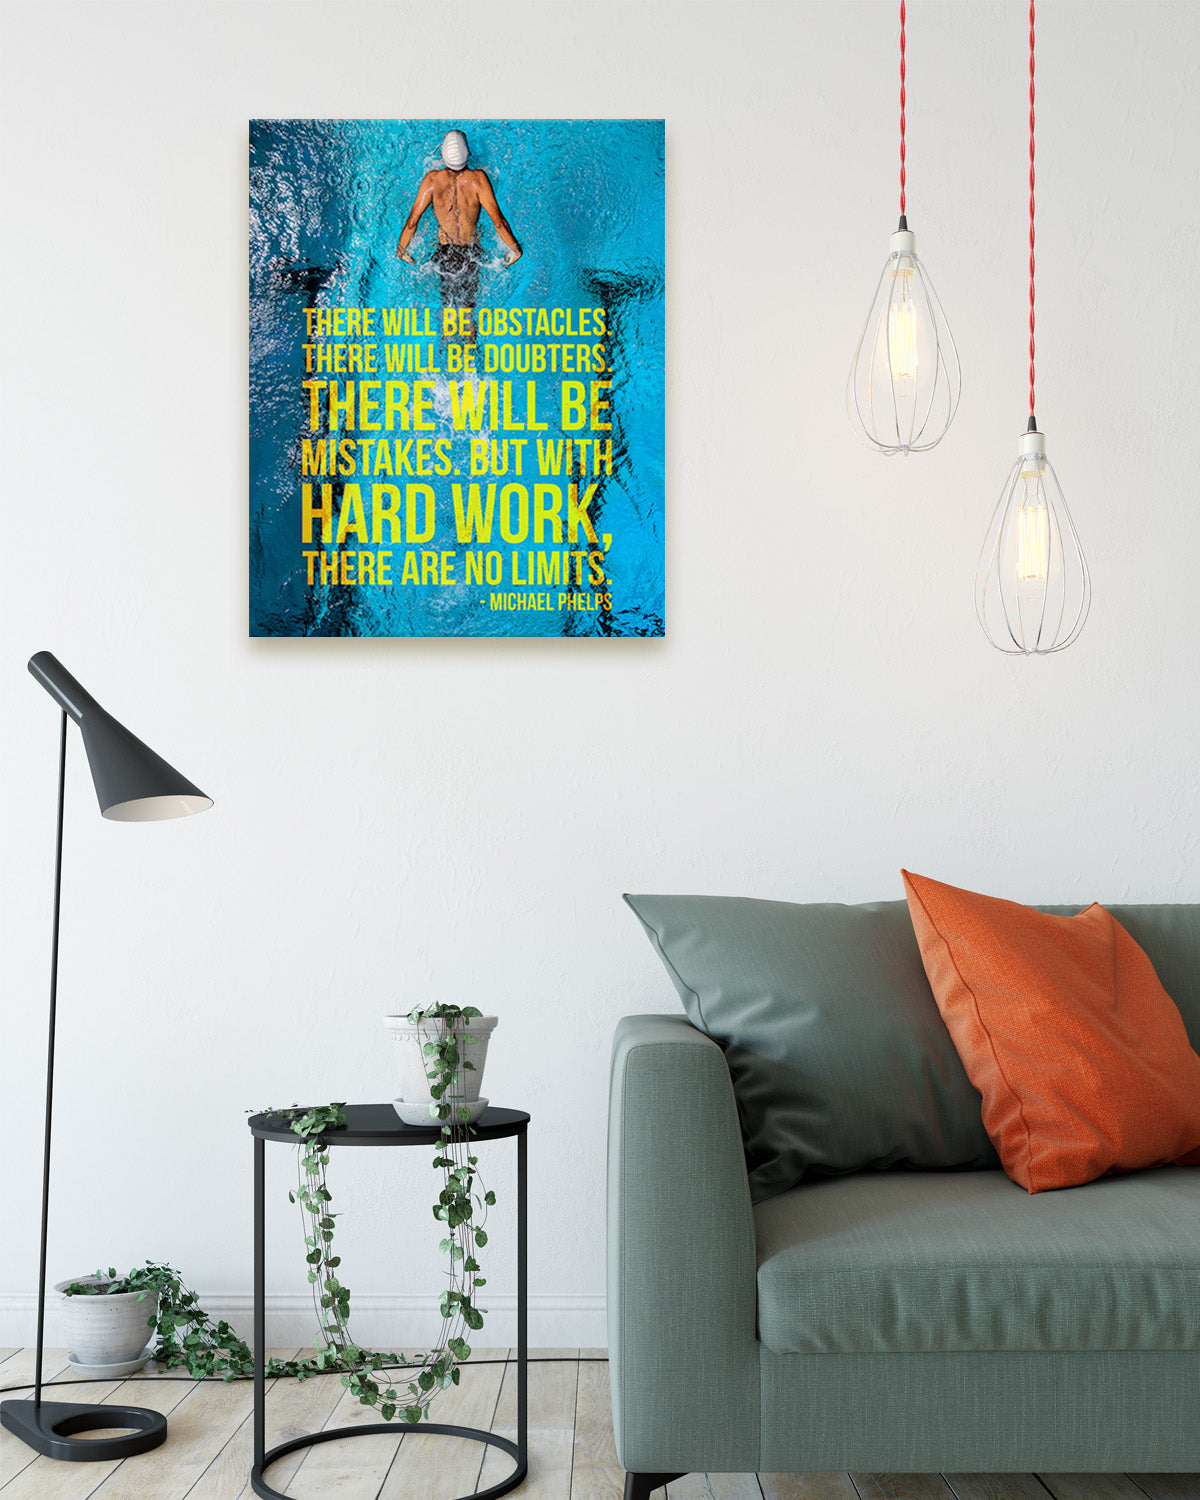 Michael Phelps inspirational wall decor - Motivational wall art for swimming enthusiasts - Positive affirmations wall decor